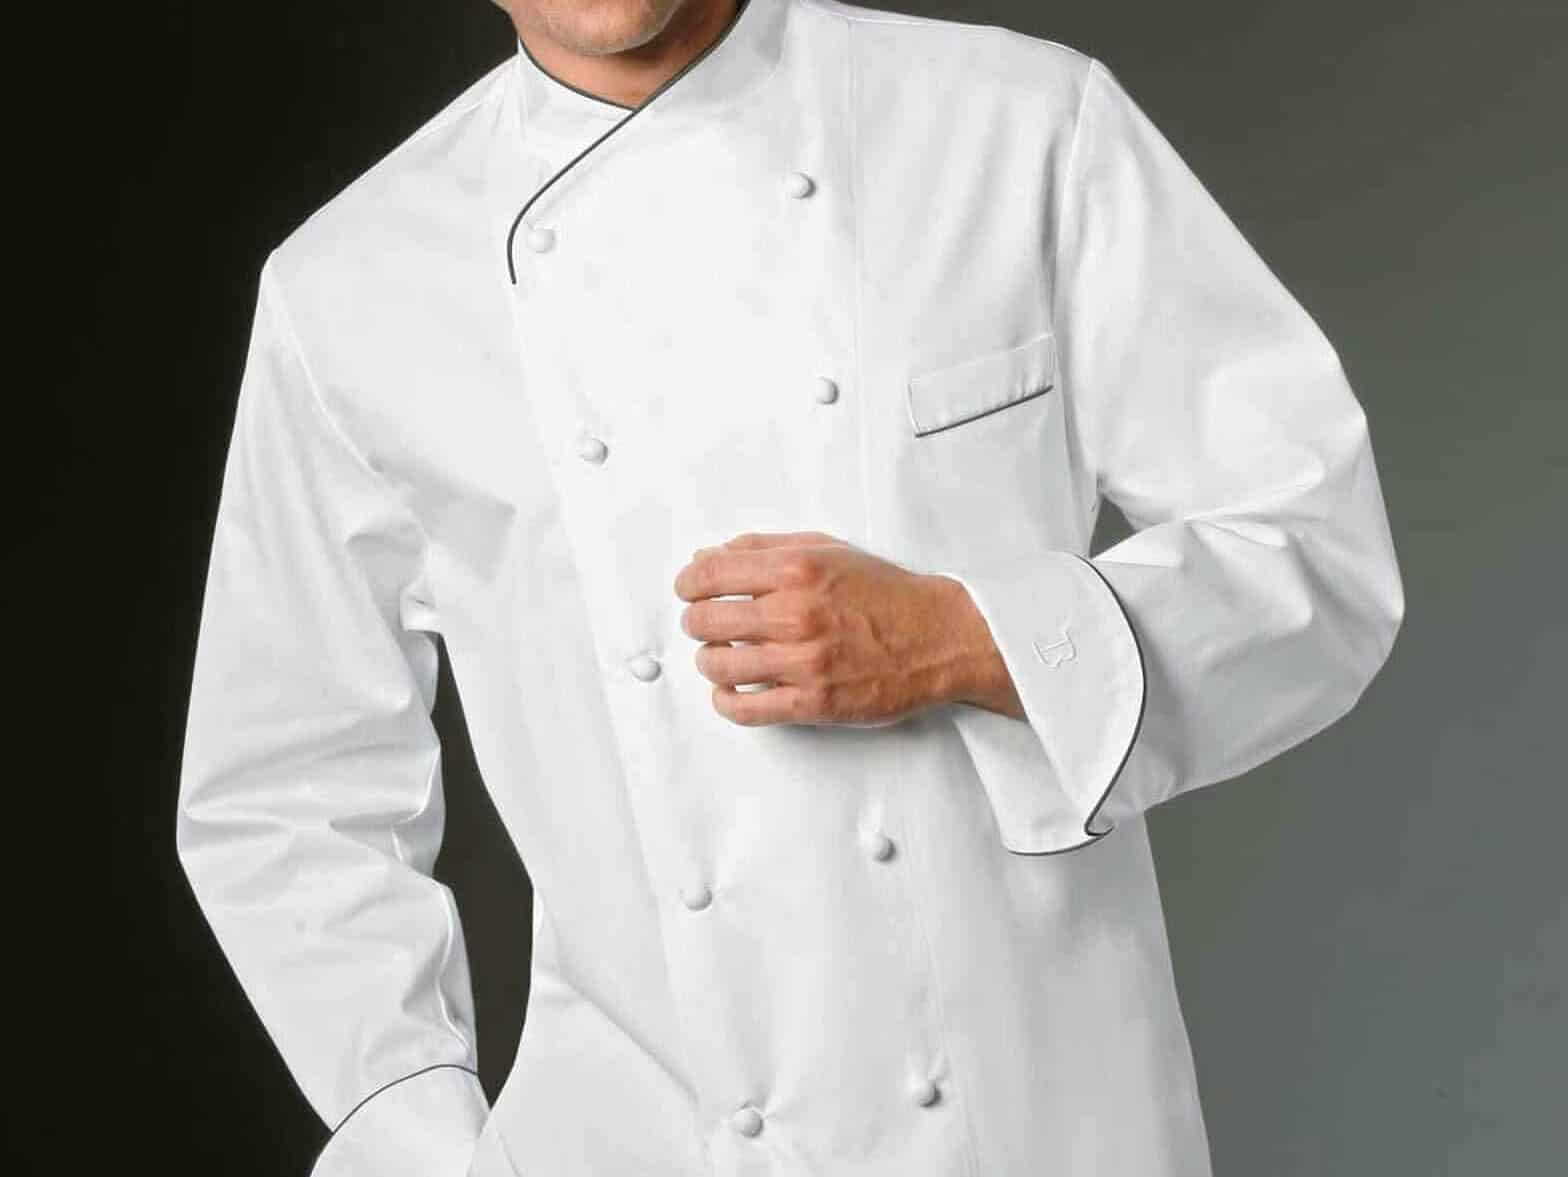 A chefs jacket keeps you clean during dinner and still looks good